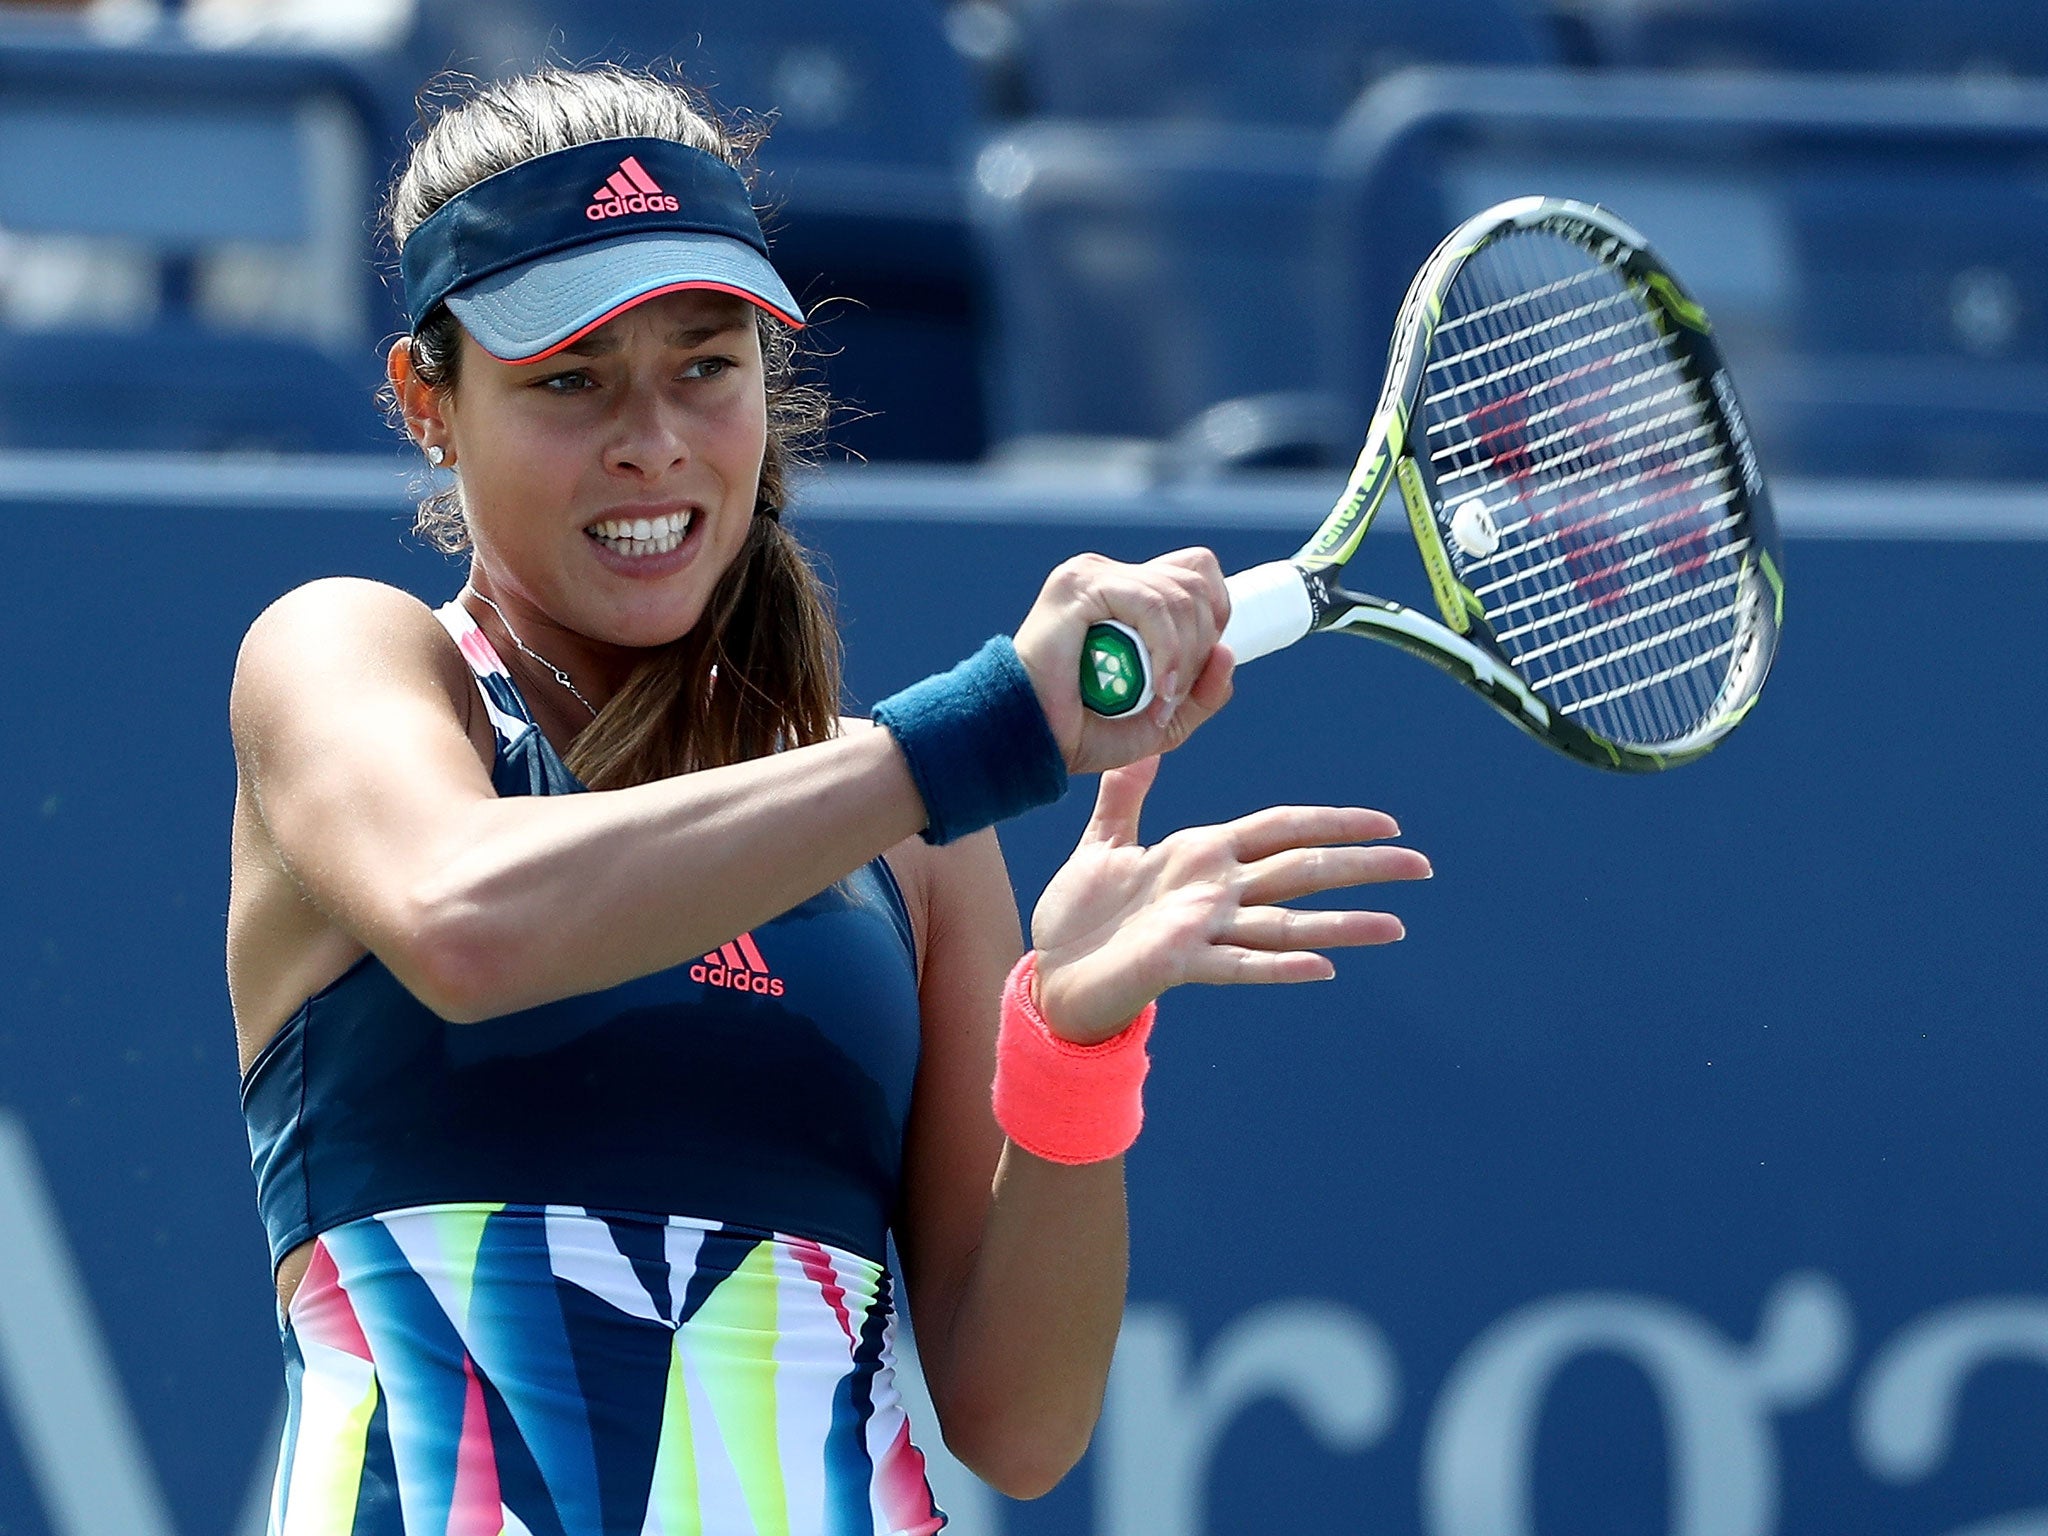 Ana Ivanovic in action at this year's US Open